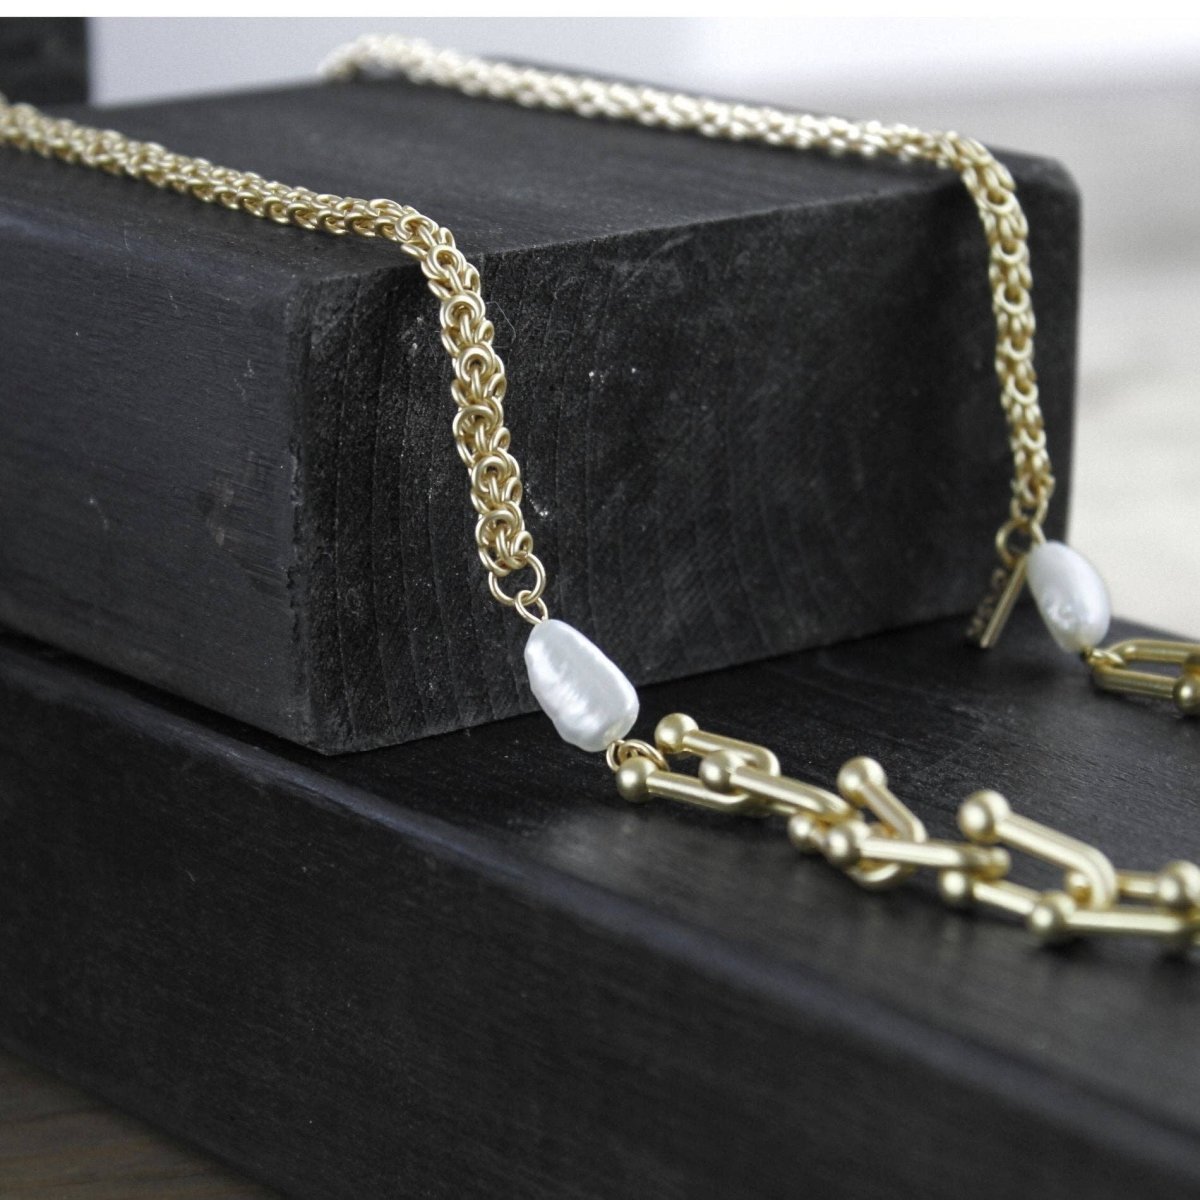 Collana Audrey IN:BIG Chain Mix placcatura in oro - Infinity Concept Store